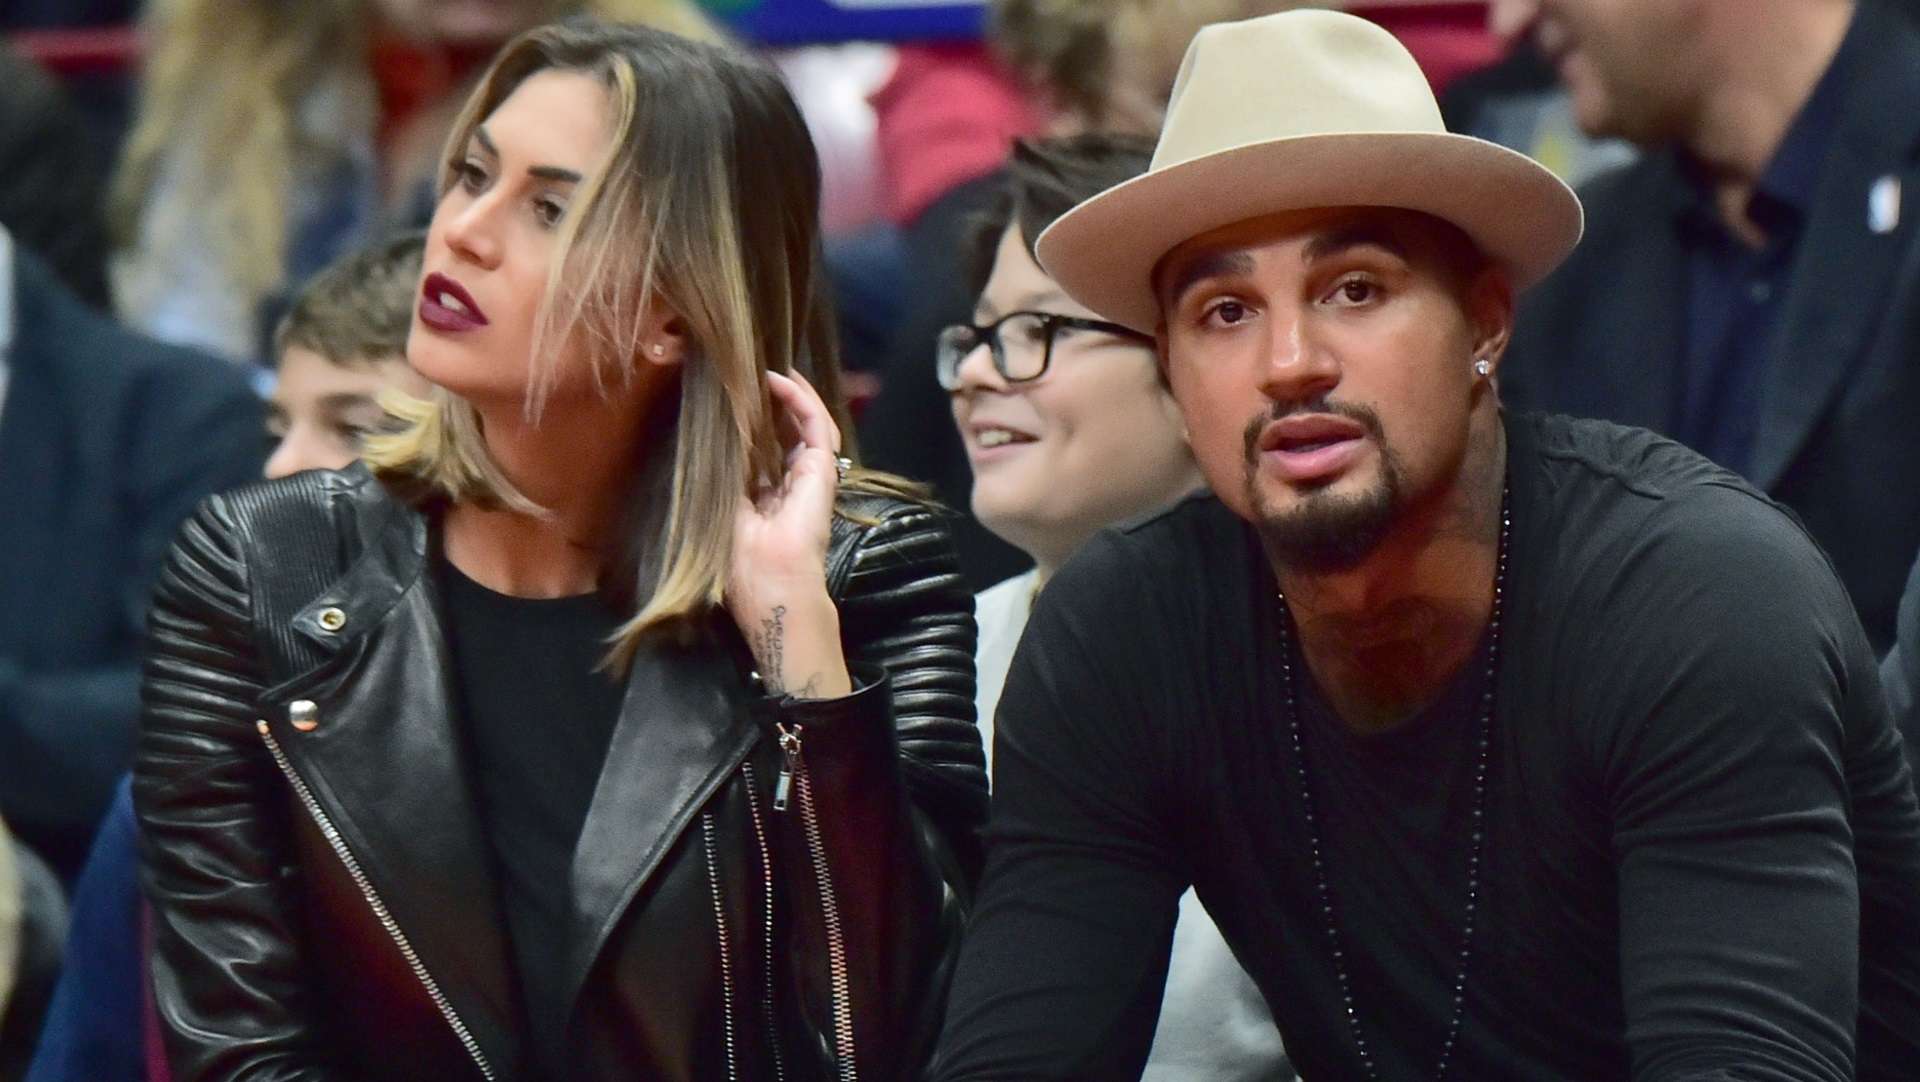 Kevin-Prince Boateng and Melissa Satta